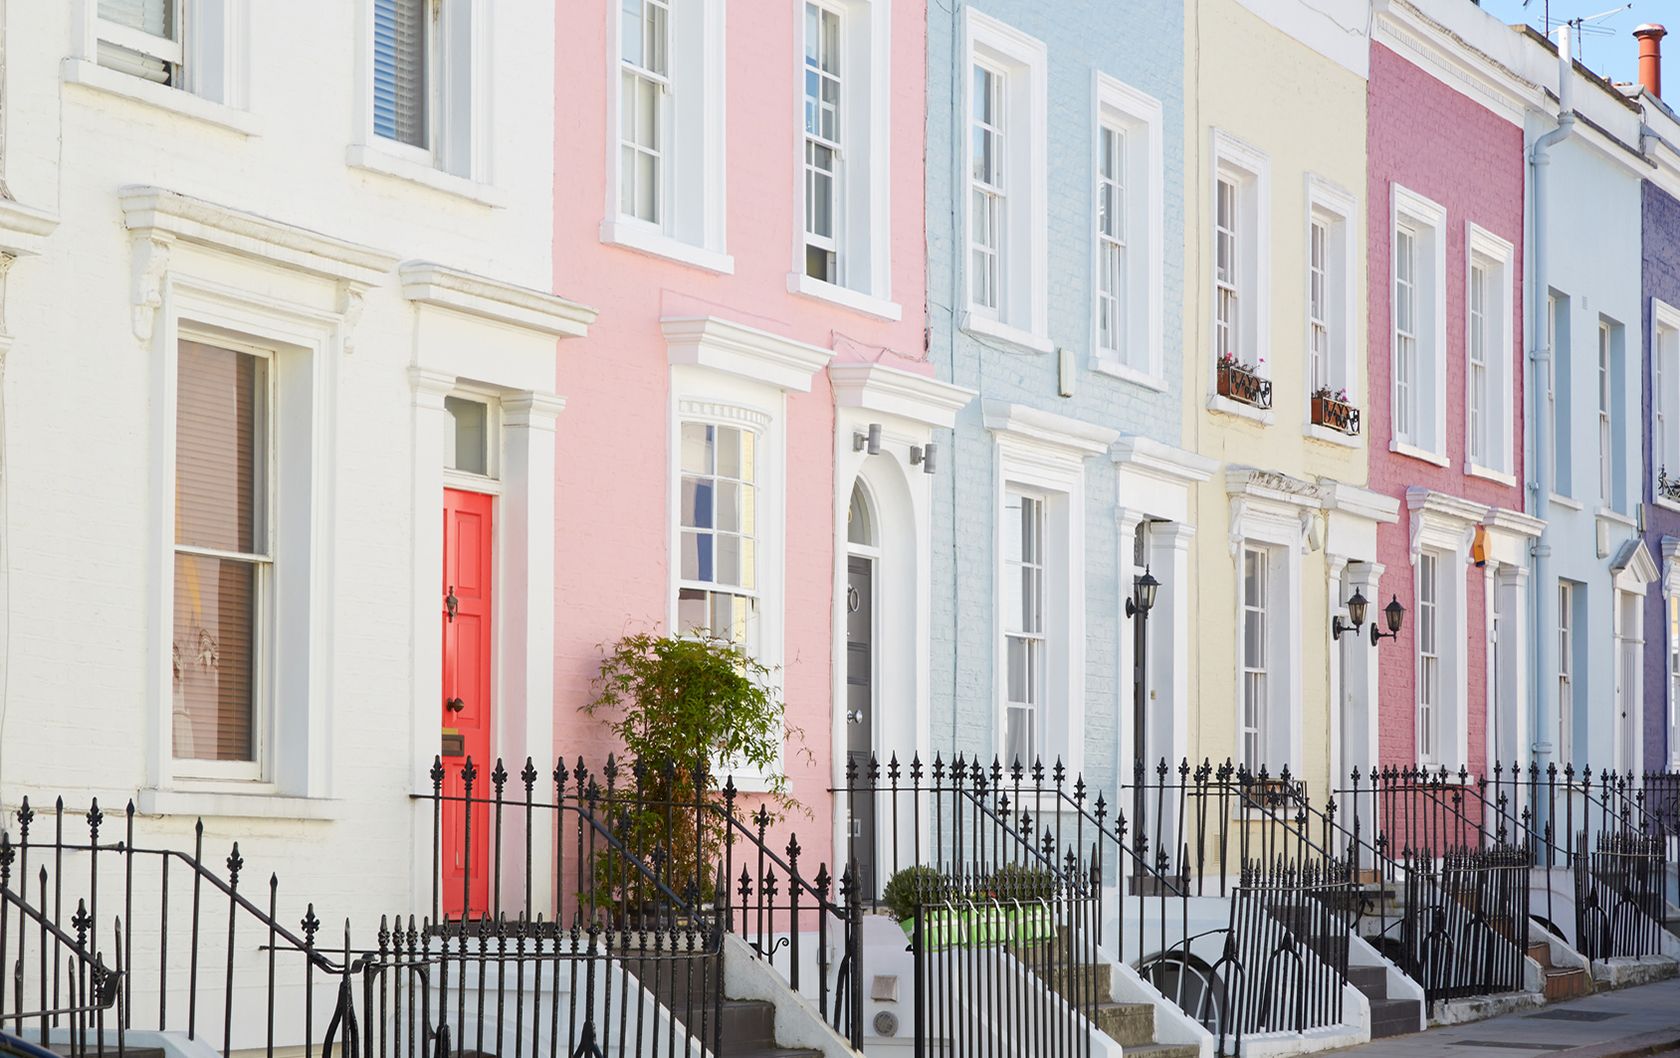 Row of pastel coloured houses in Notting Hill